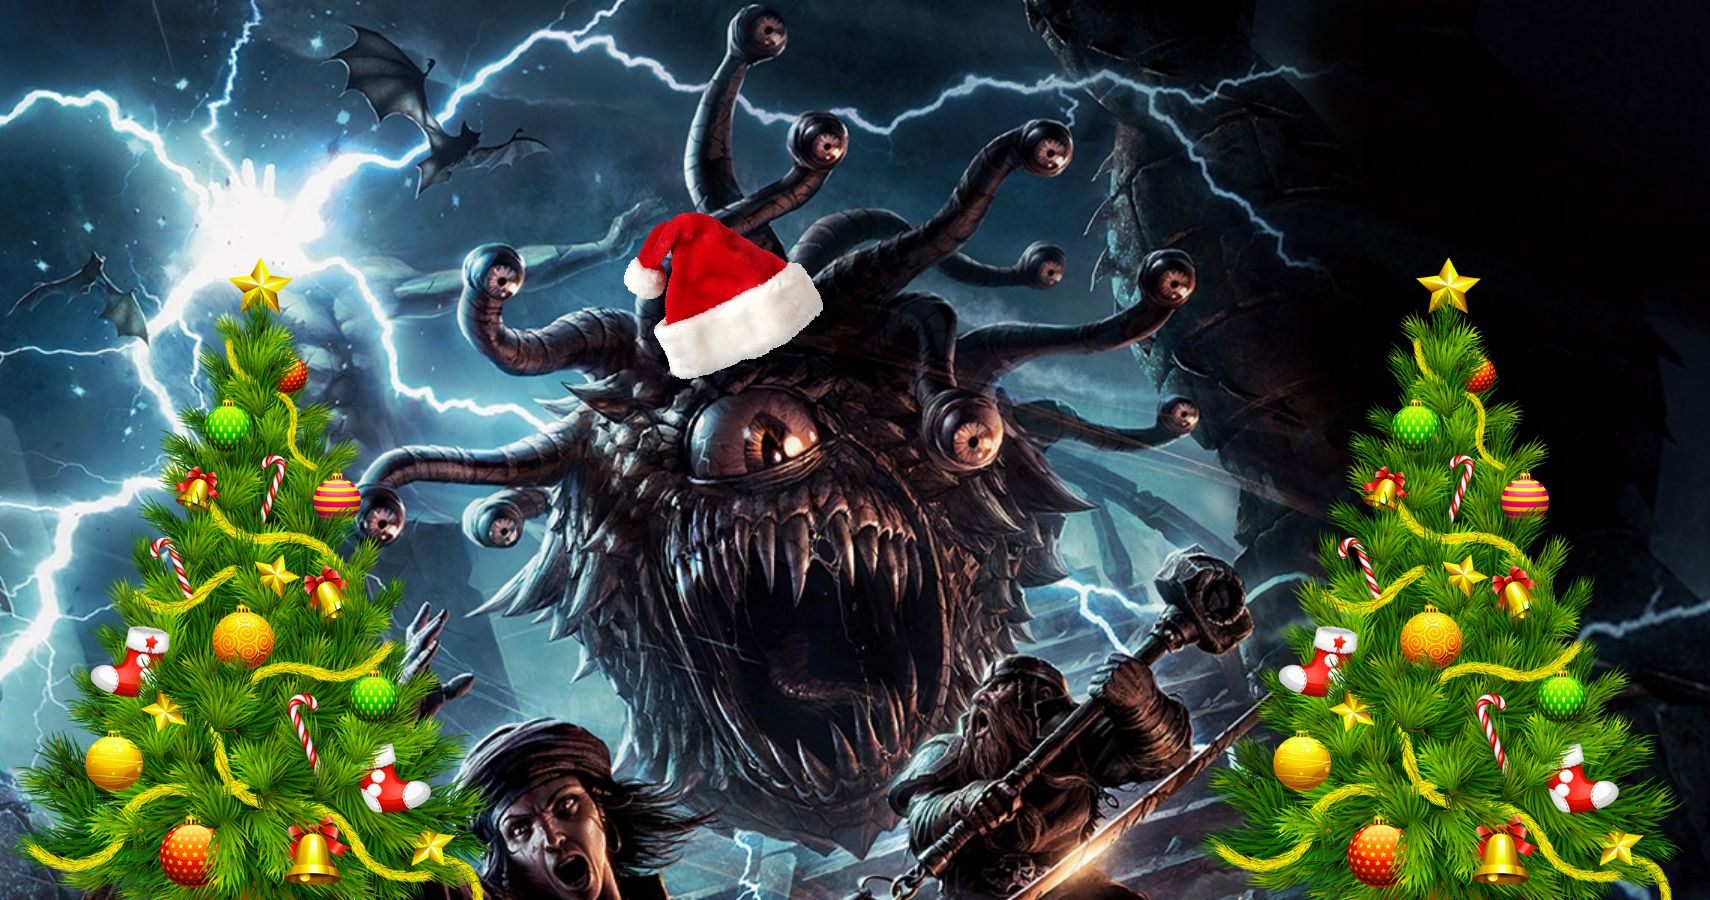 Beholder-Christmas-Dungeons-Dragons-Holiday-Cover.jpg